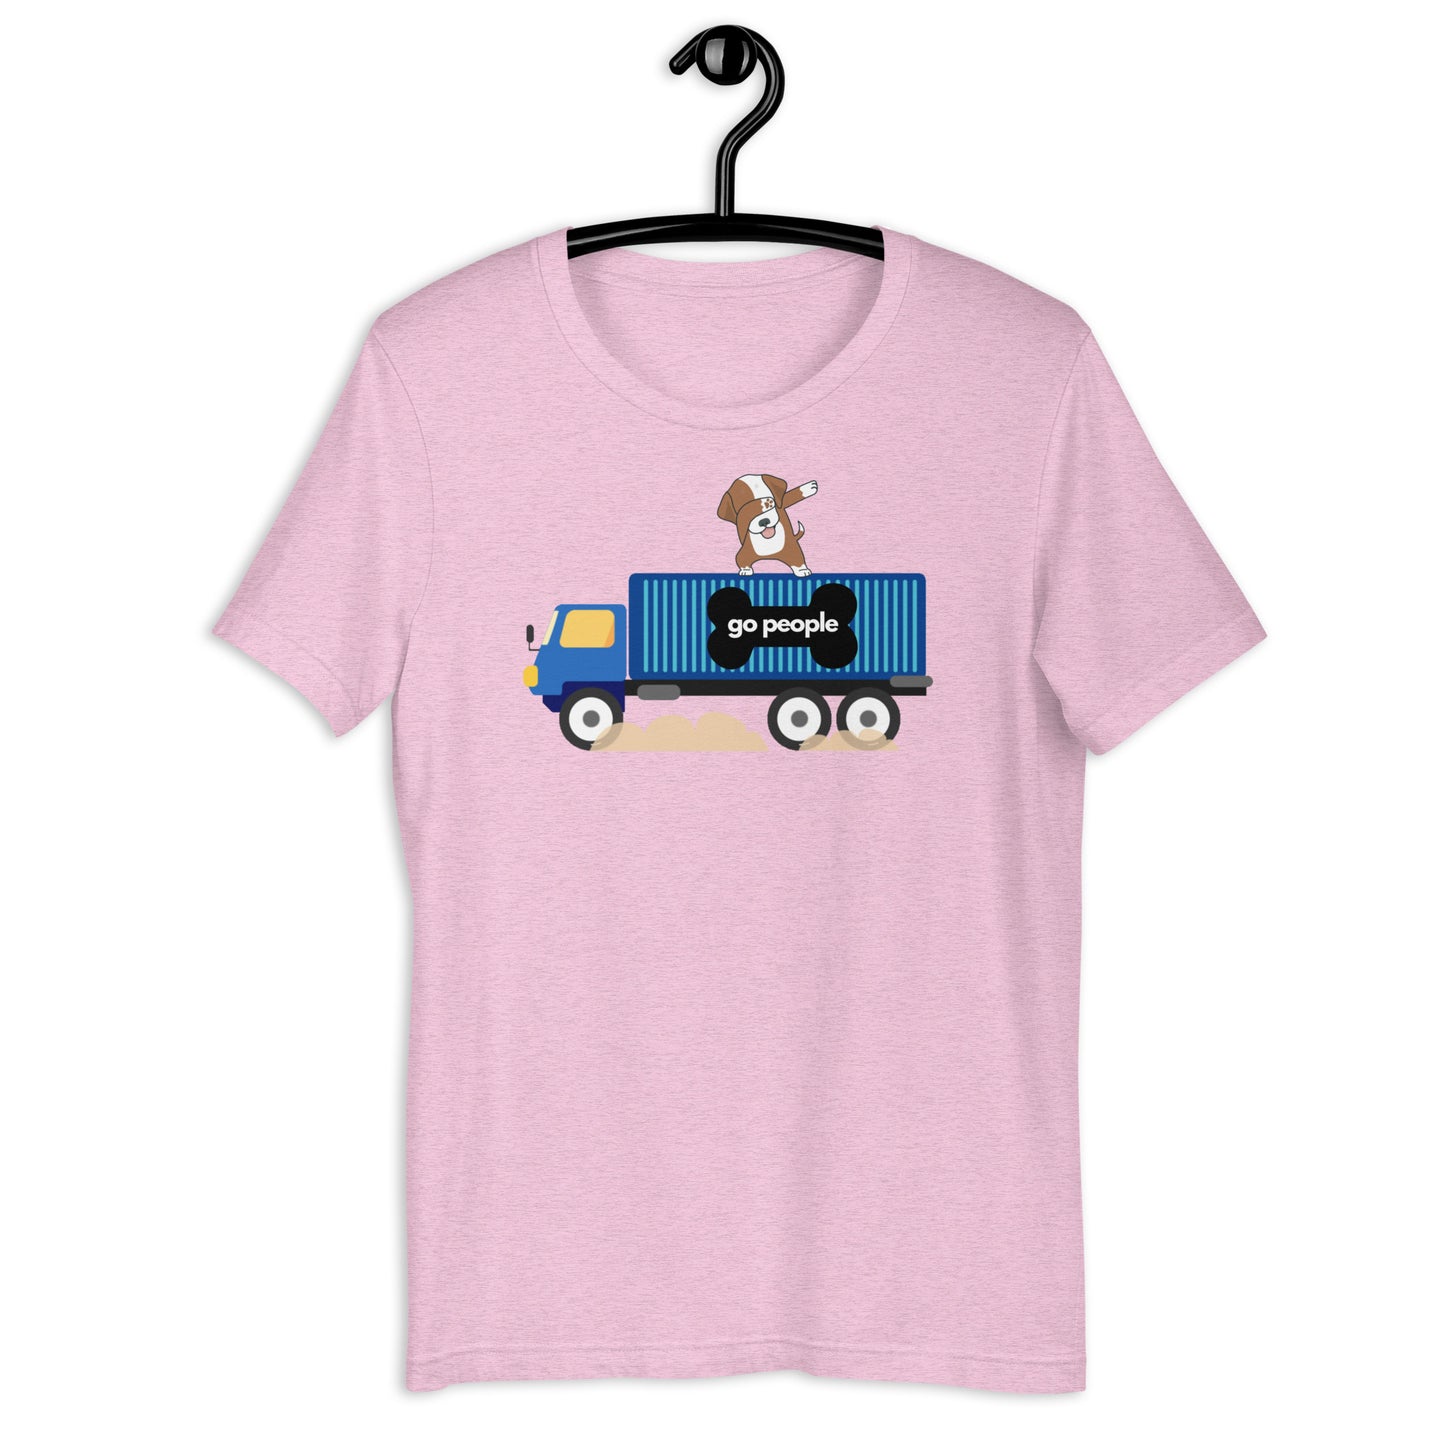 TruckDog & the Go People T-Shirt